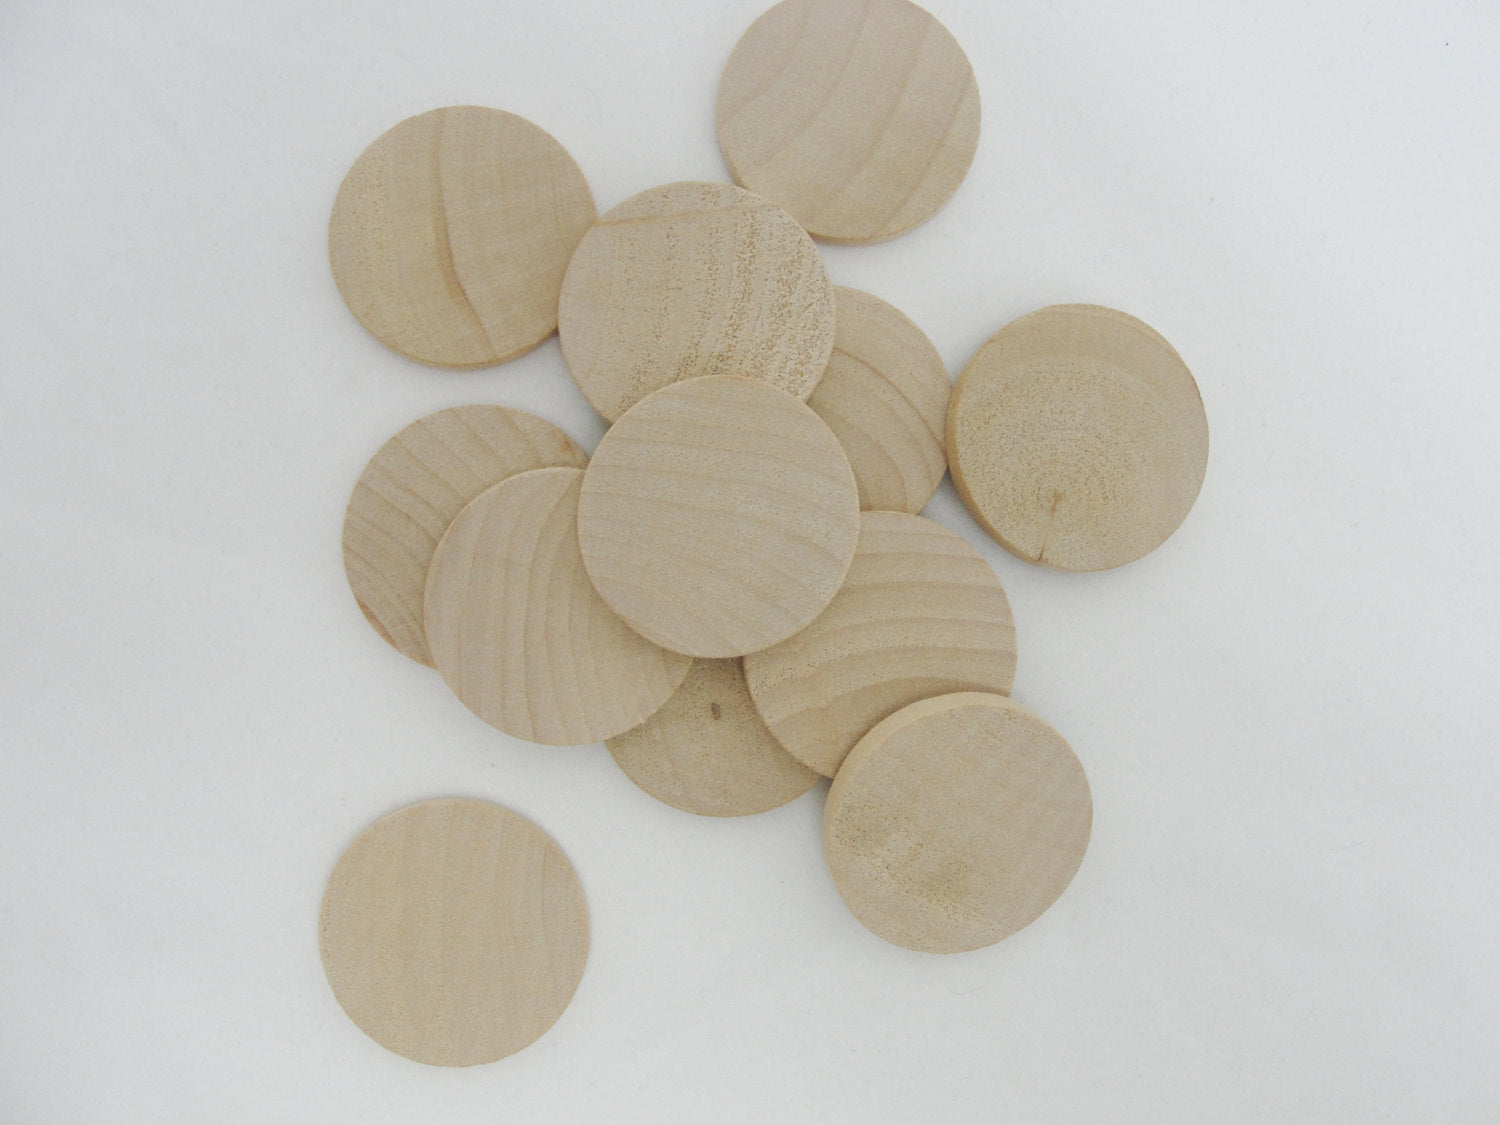 12 Domed Wooden Circles, 1 Inch Domed Disc, 1 Domed Wood Disk 3/16 Thick  Unfinished DIY 